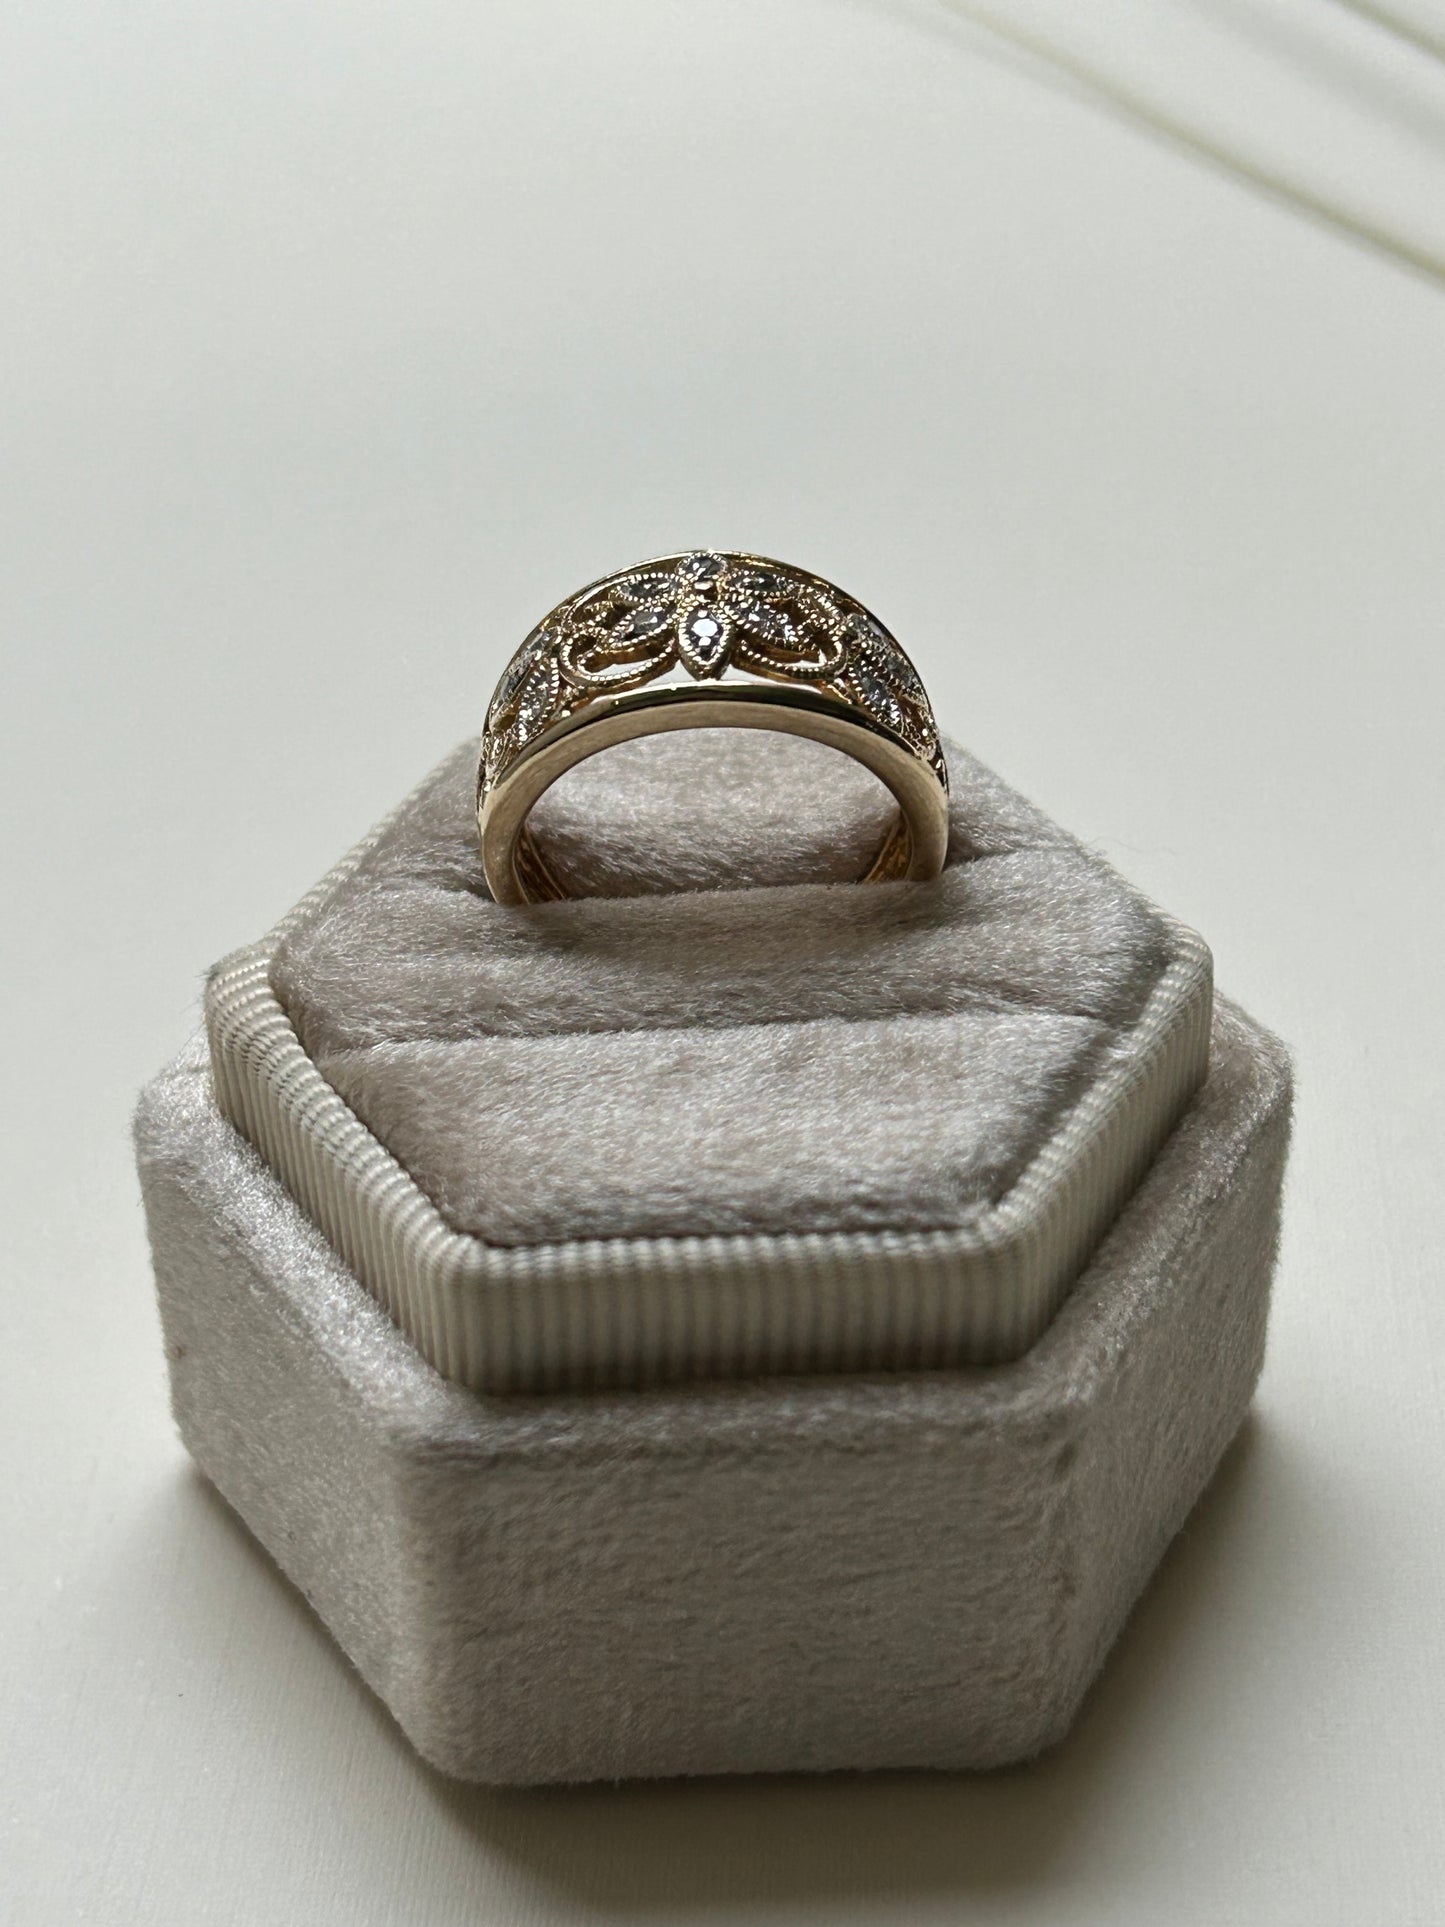 14K Floral Filigree and Diamond Ring